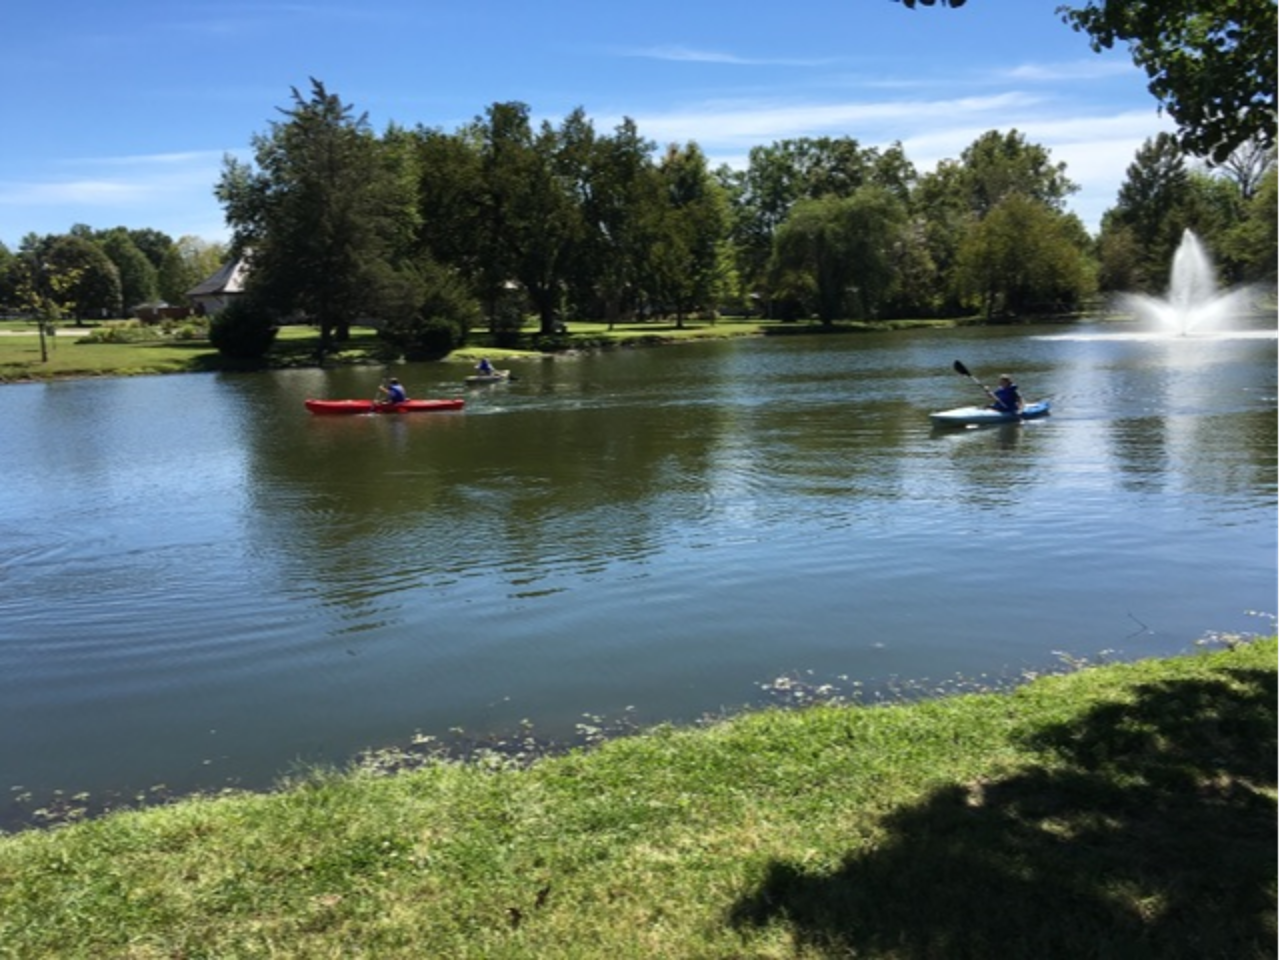 Students in Kayaks